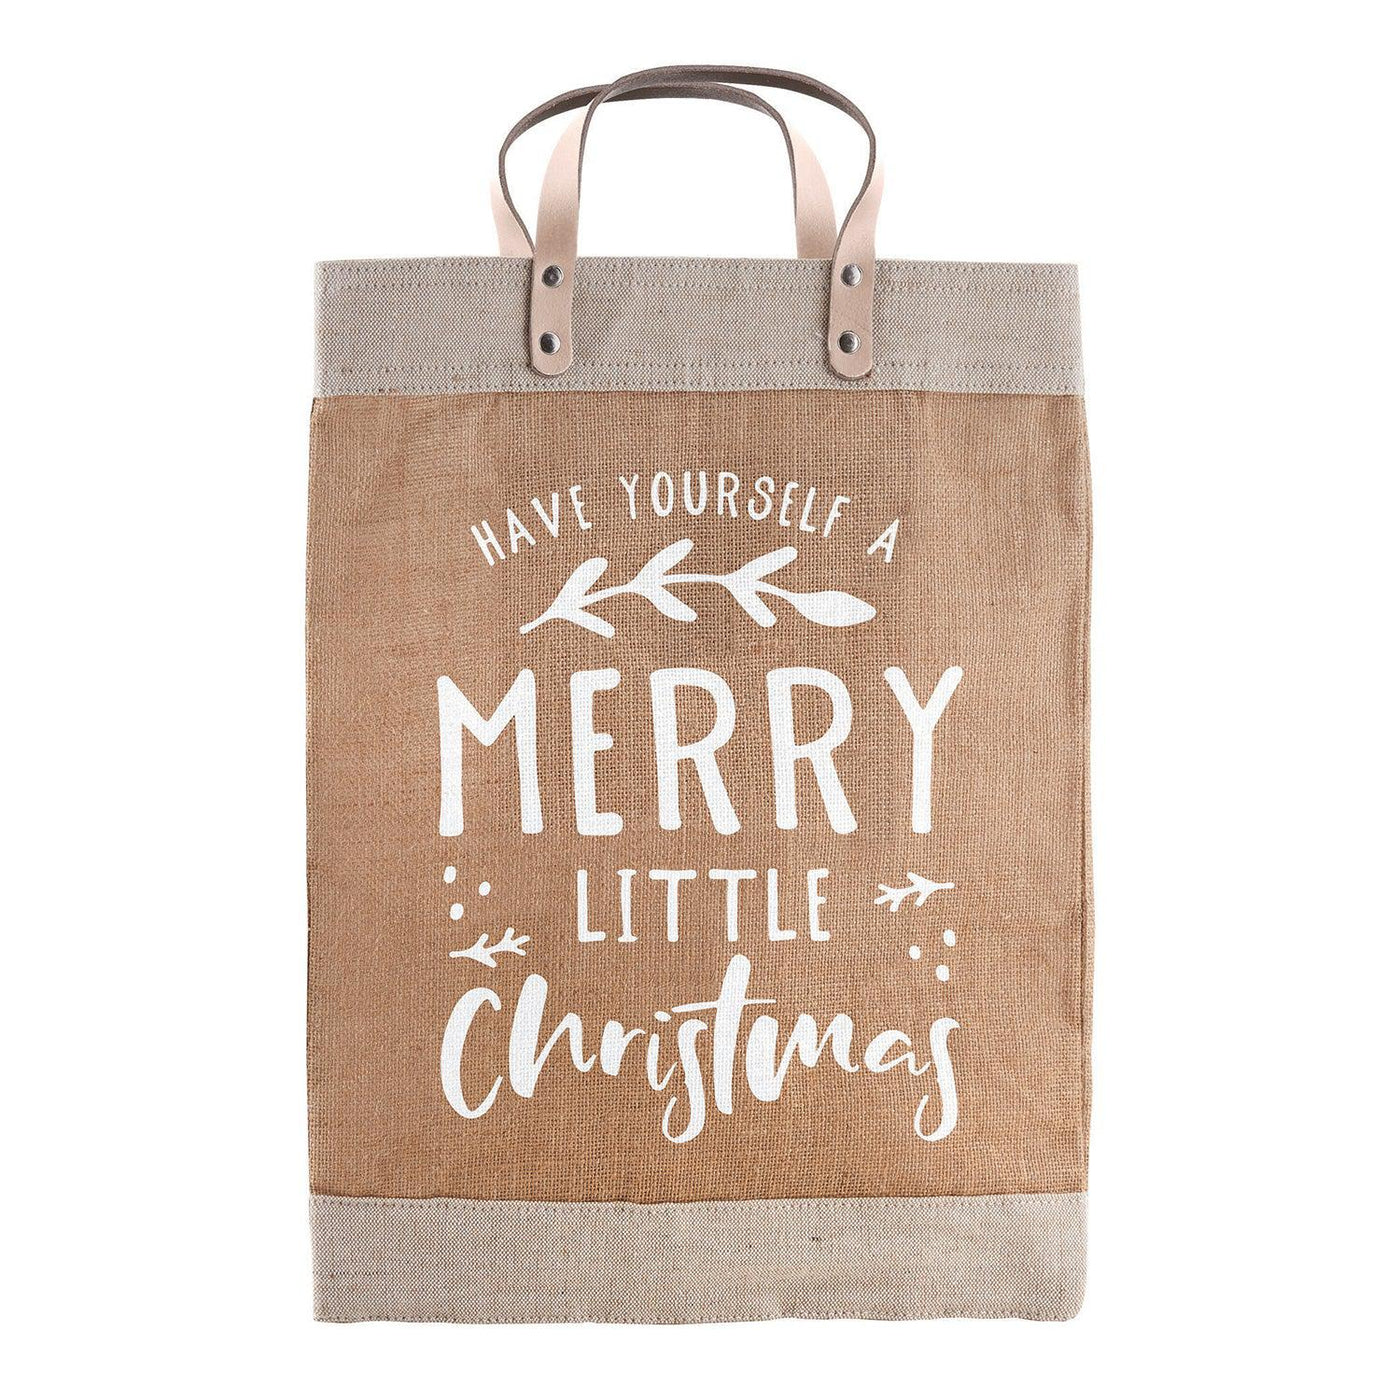  Farmers Market Merry Christmas Tote Godgirl Gifts